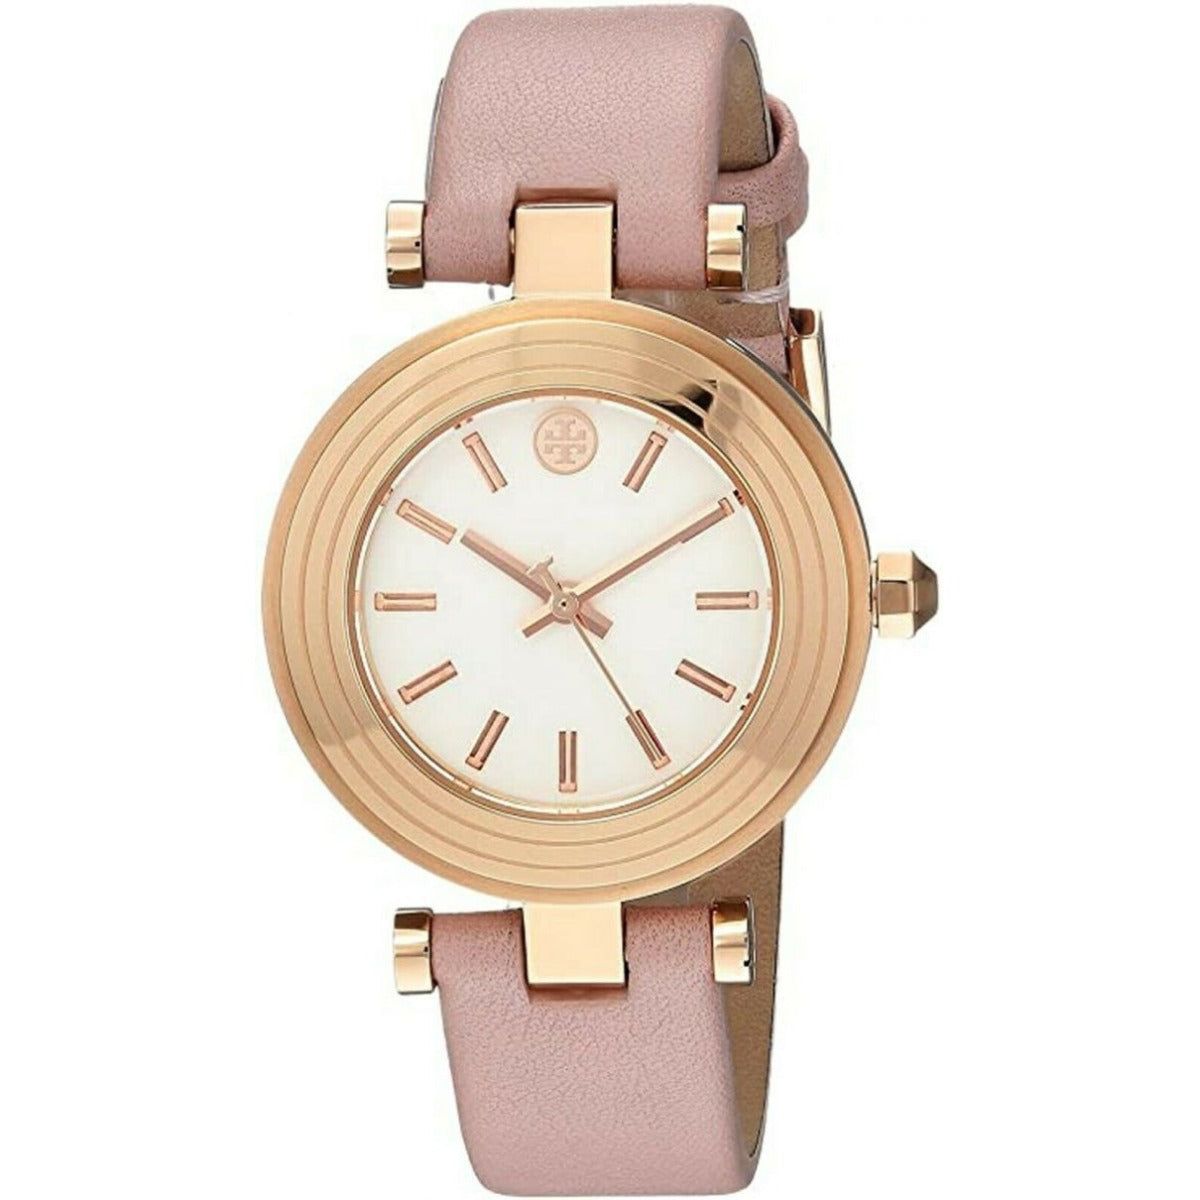 TORY BURCH TBW9008 CLASSIC T ROSE GOLD PINK LEATHER WOMEN'S WATCH - 796483340947